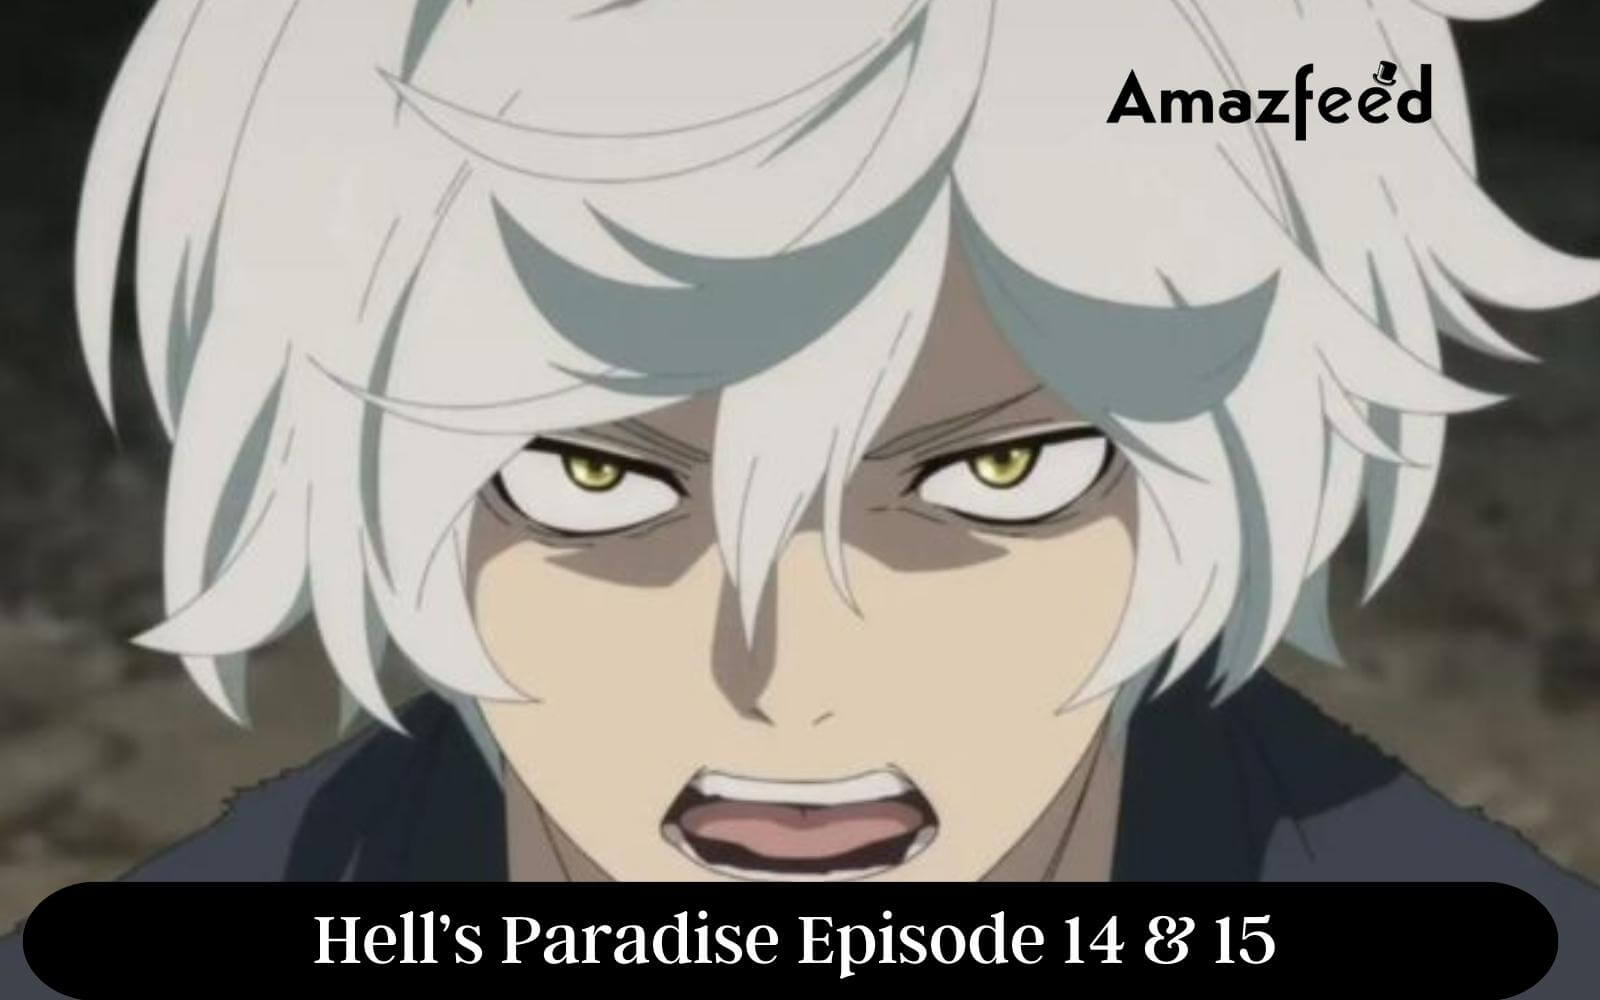 Hell's Paradise Episode 14 & 15 Release Date